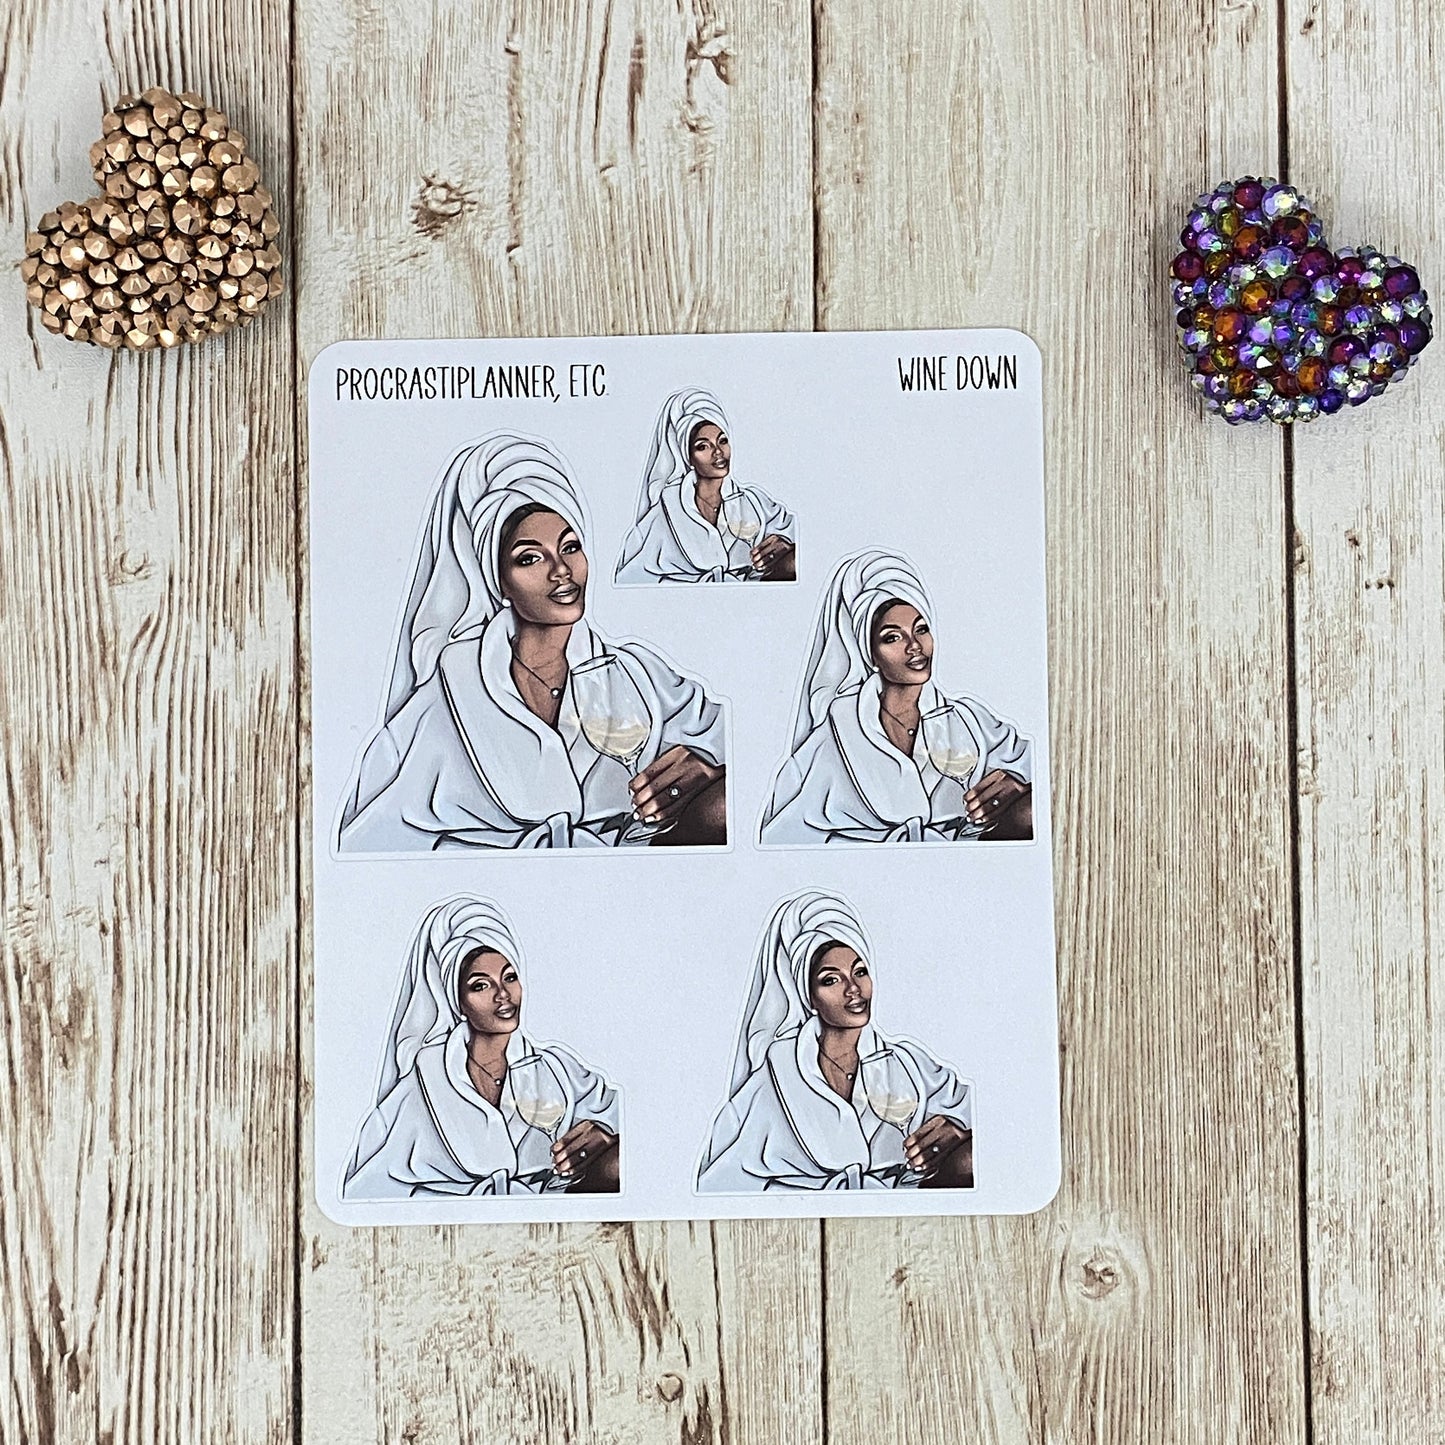 Wine Down - Self-Care Planner Stickers African American Woman